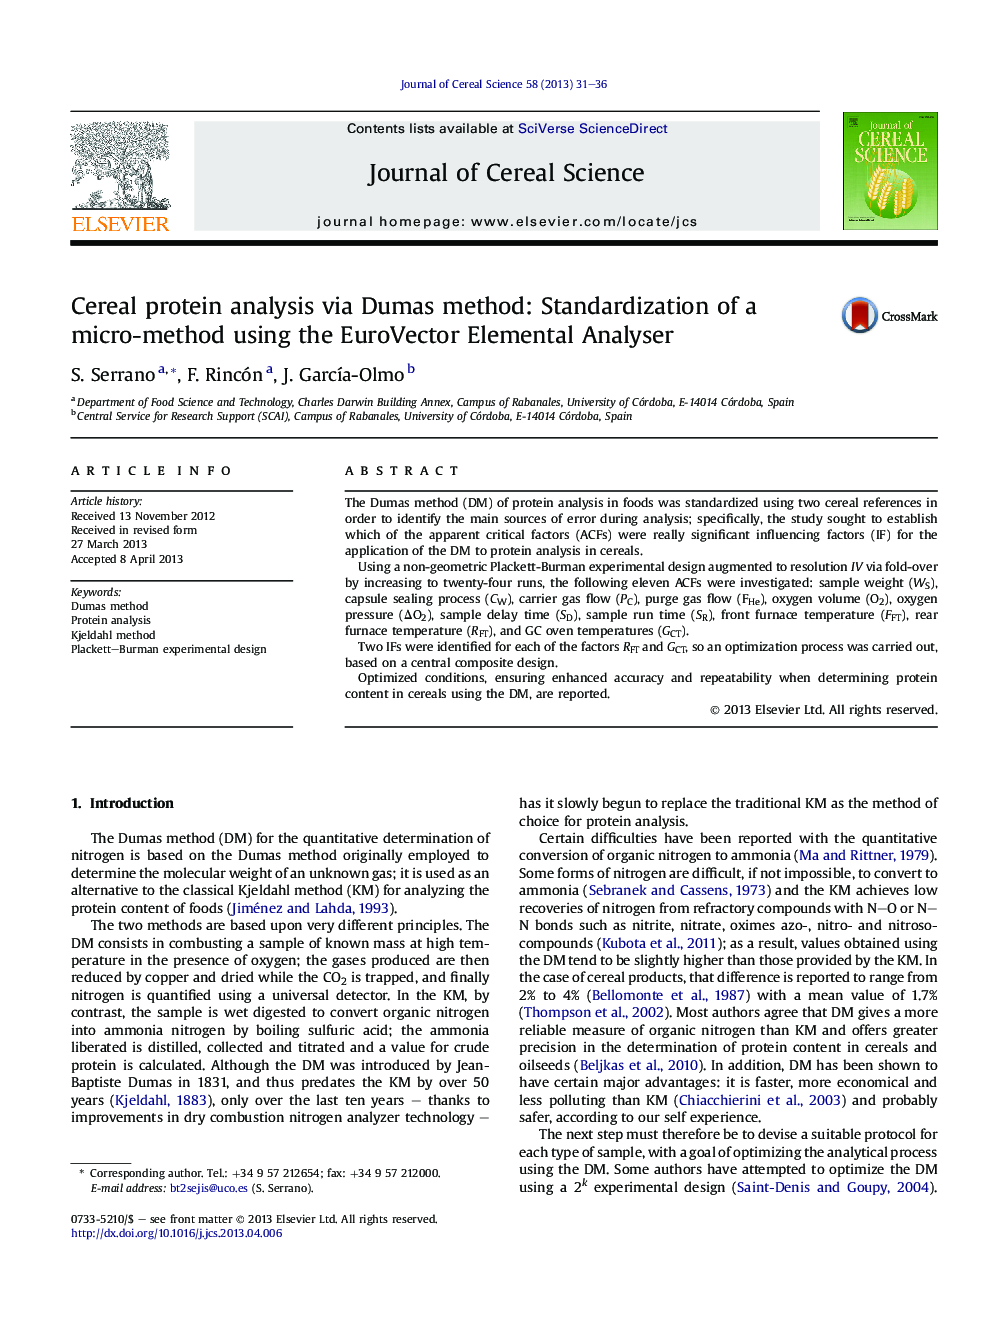 Cereal protein analysis via Dumas method: Standardization of a micro-method using the EuroVector Elemental Analyser